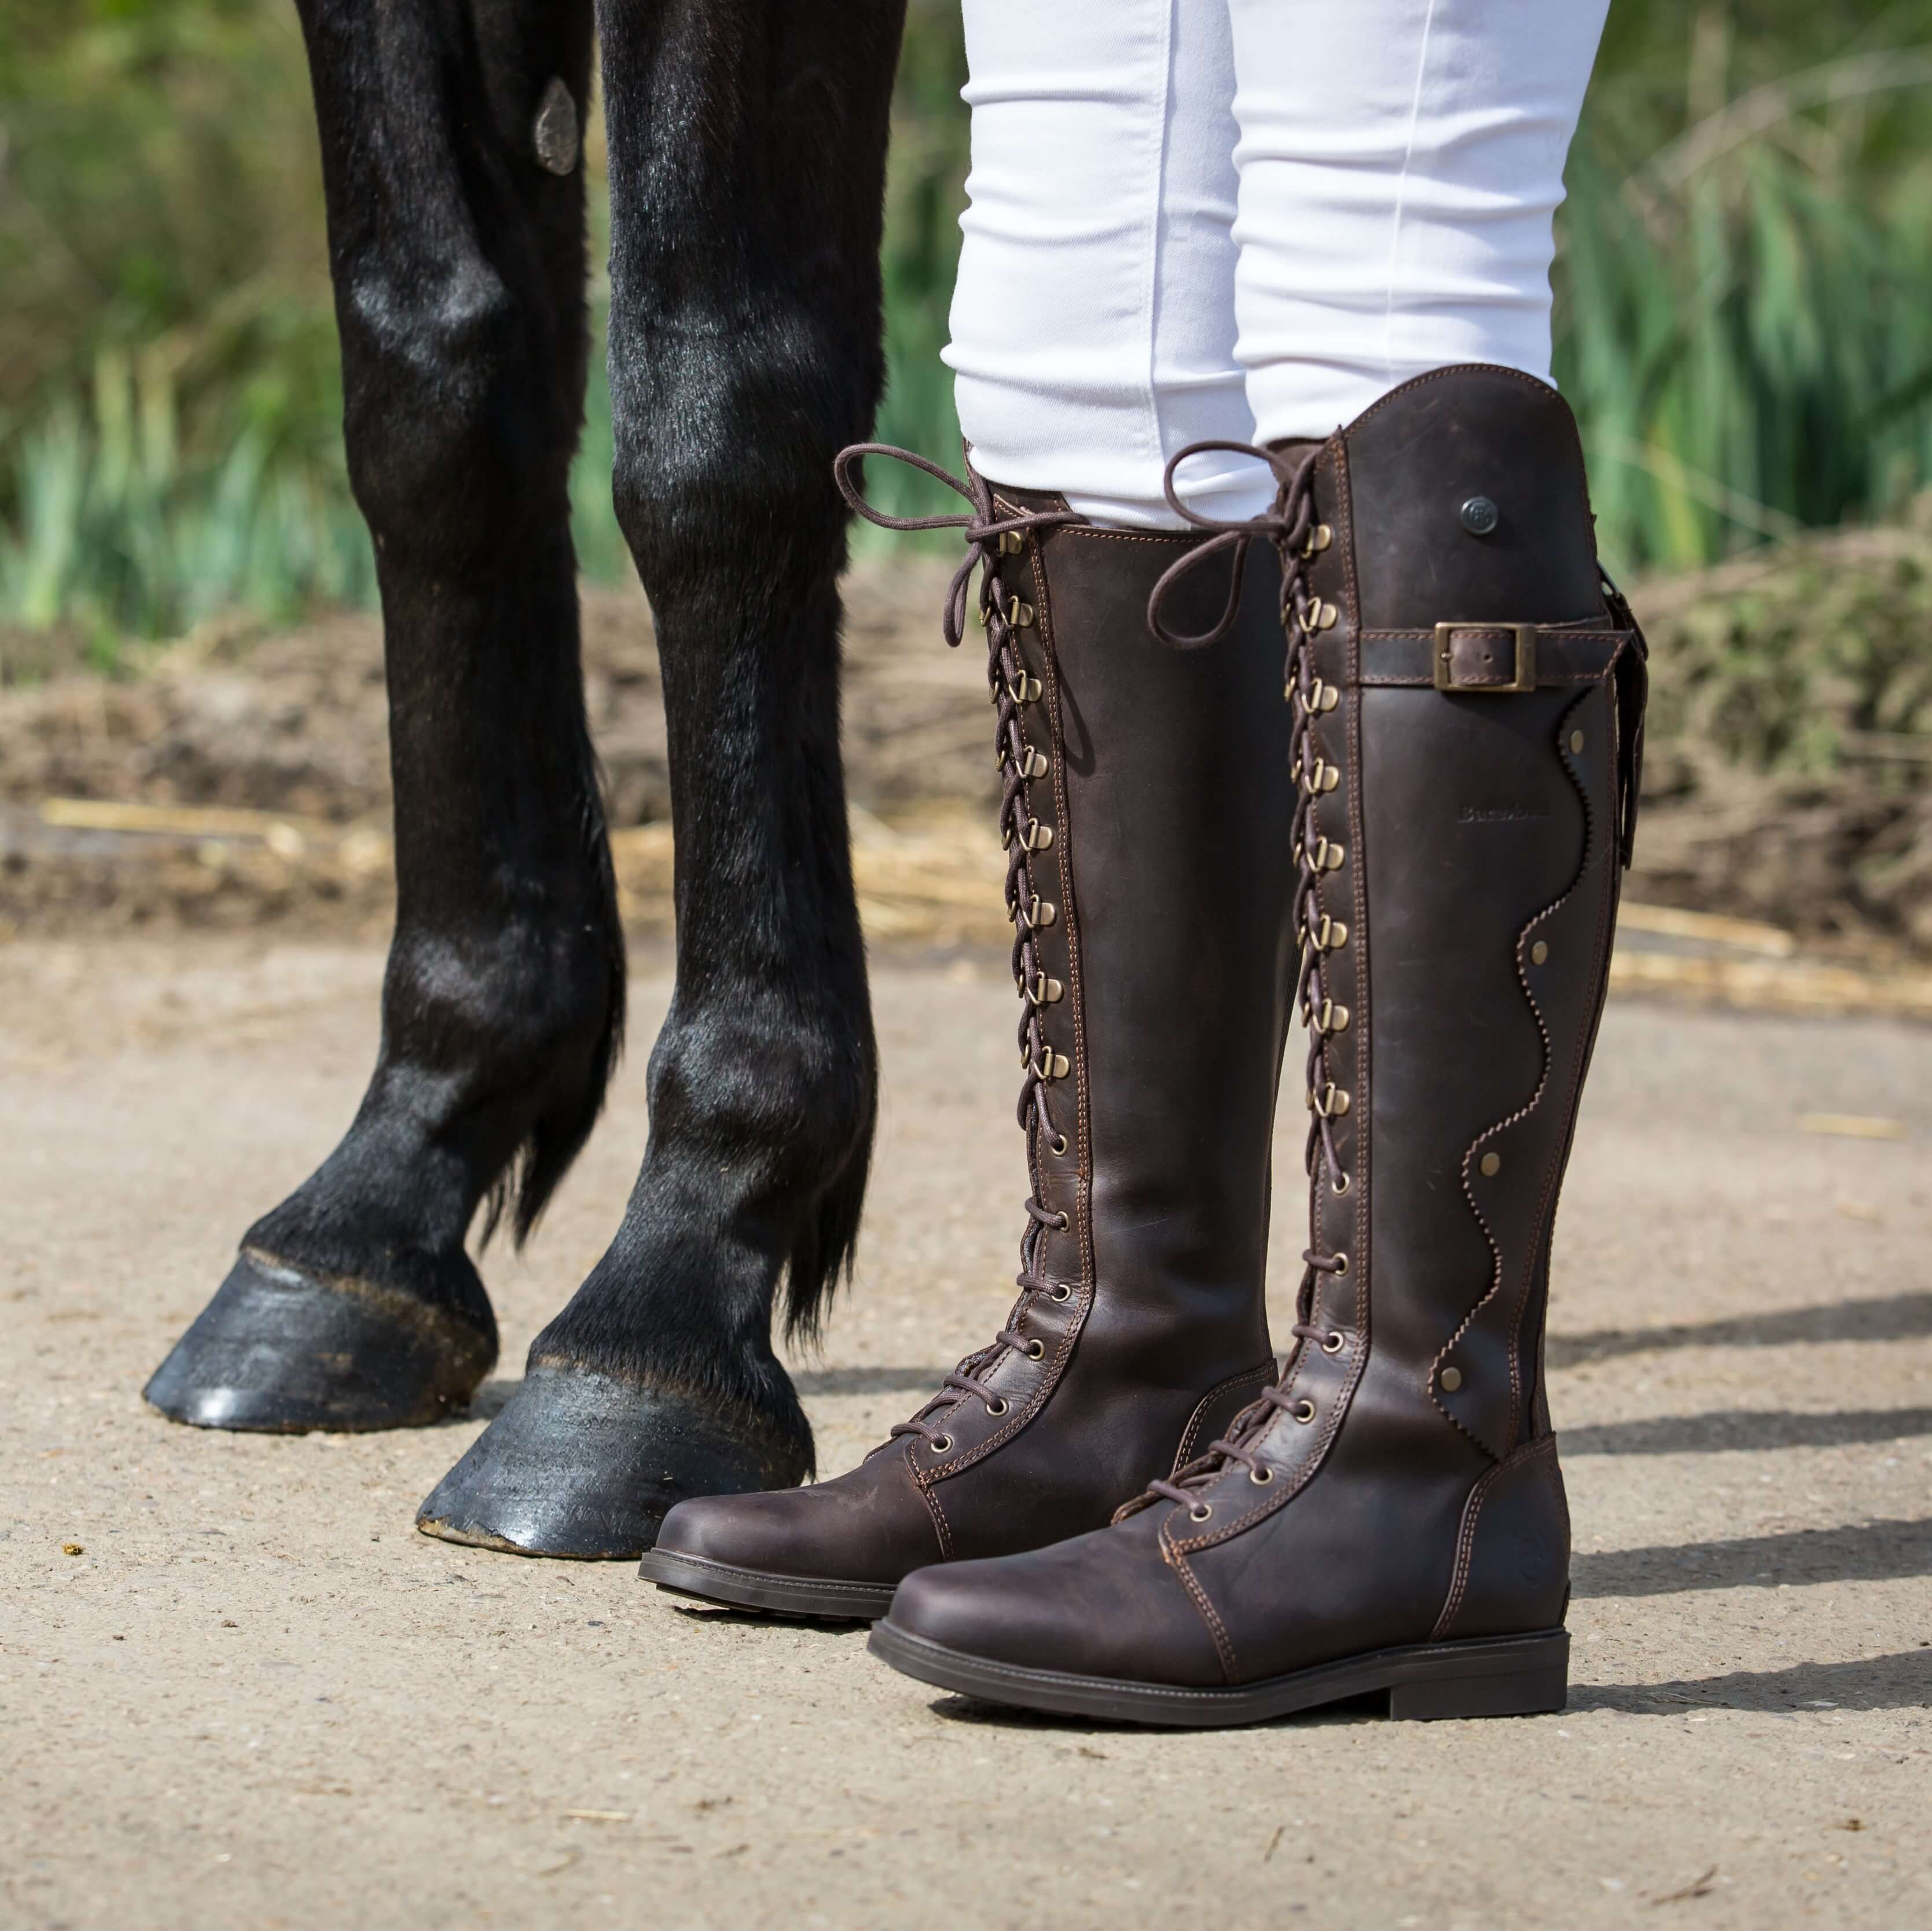 Womens Long Riding, Yard and Country Boots - Bareback Footwear